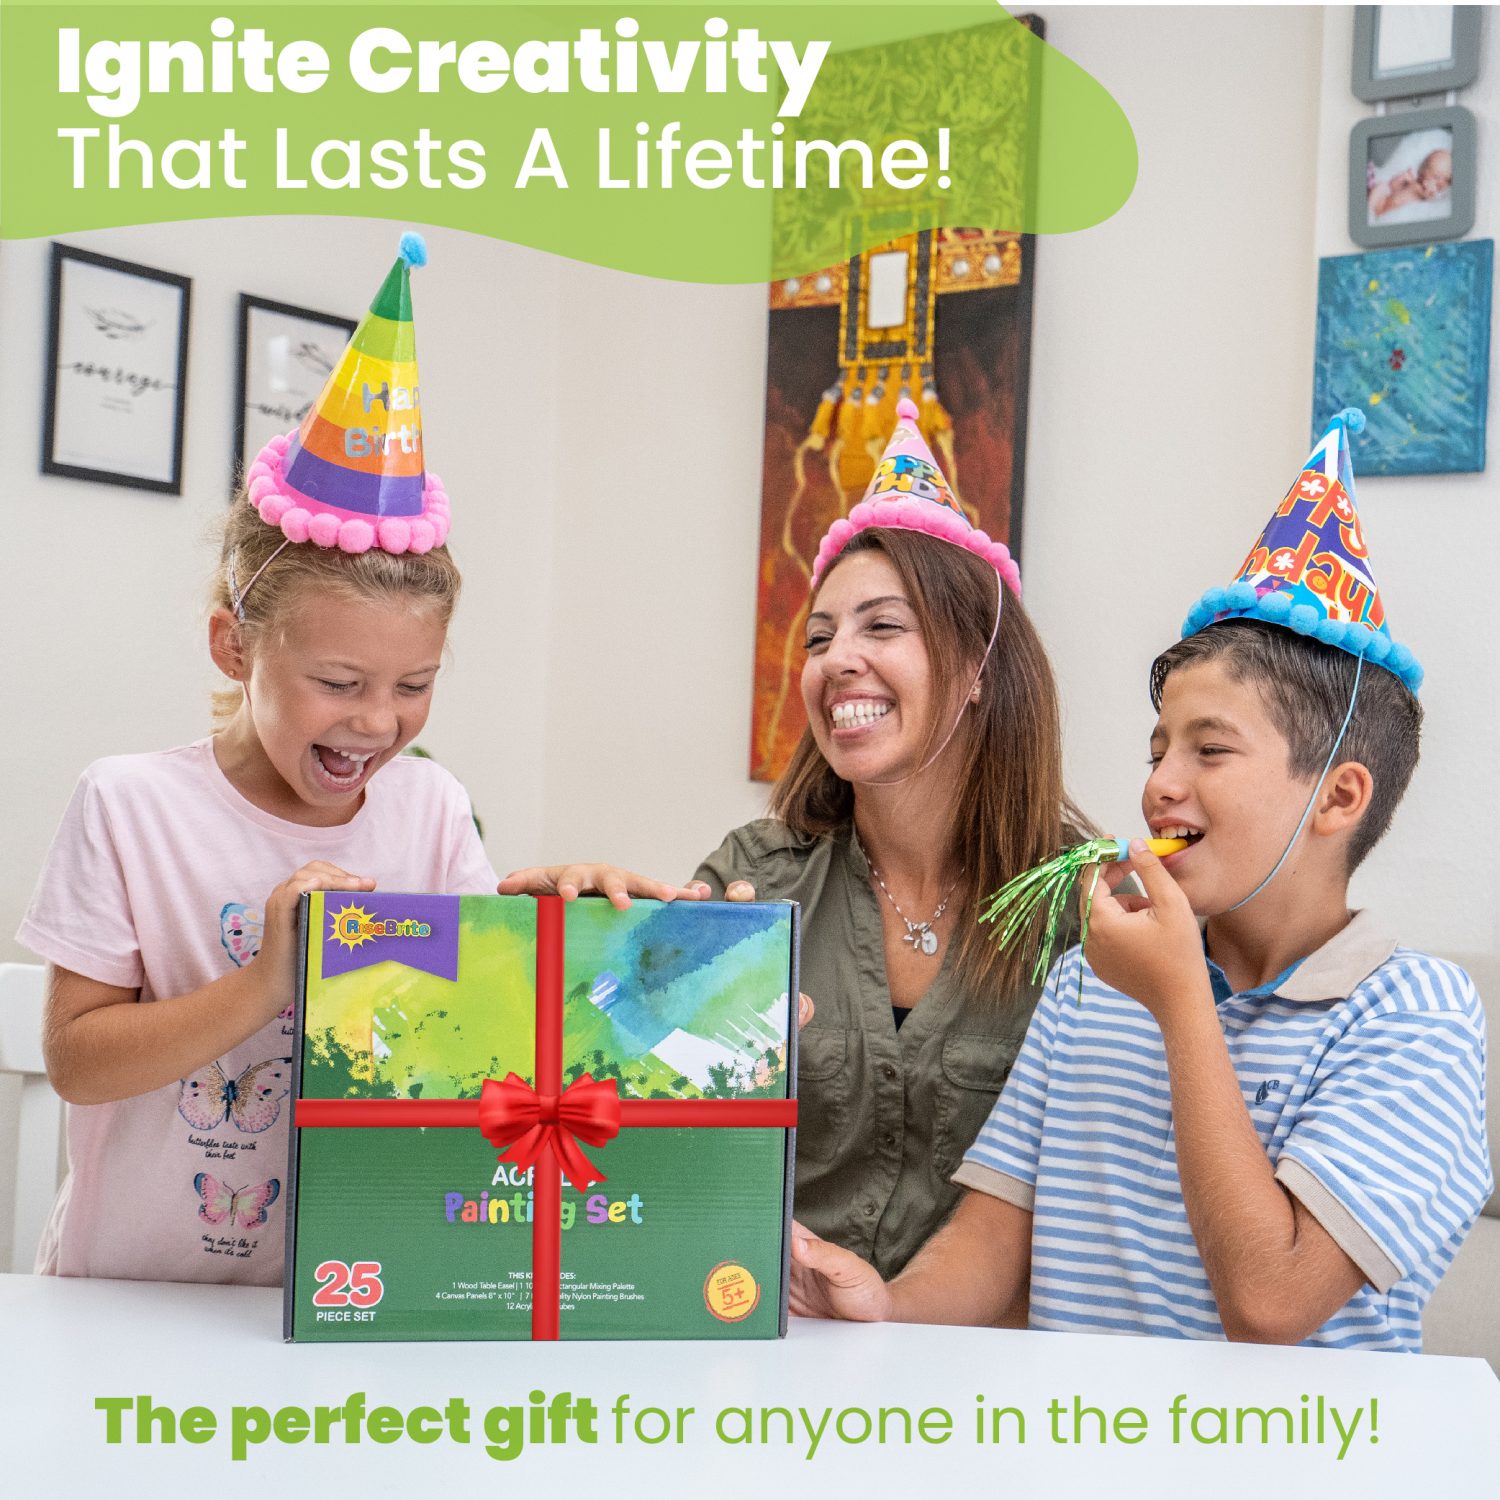 RiseBrite Acrylic Paint Set - Is The Perfect Gift For Anyone In The Family